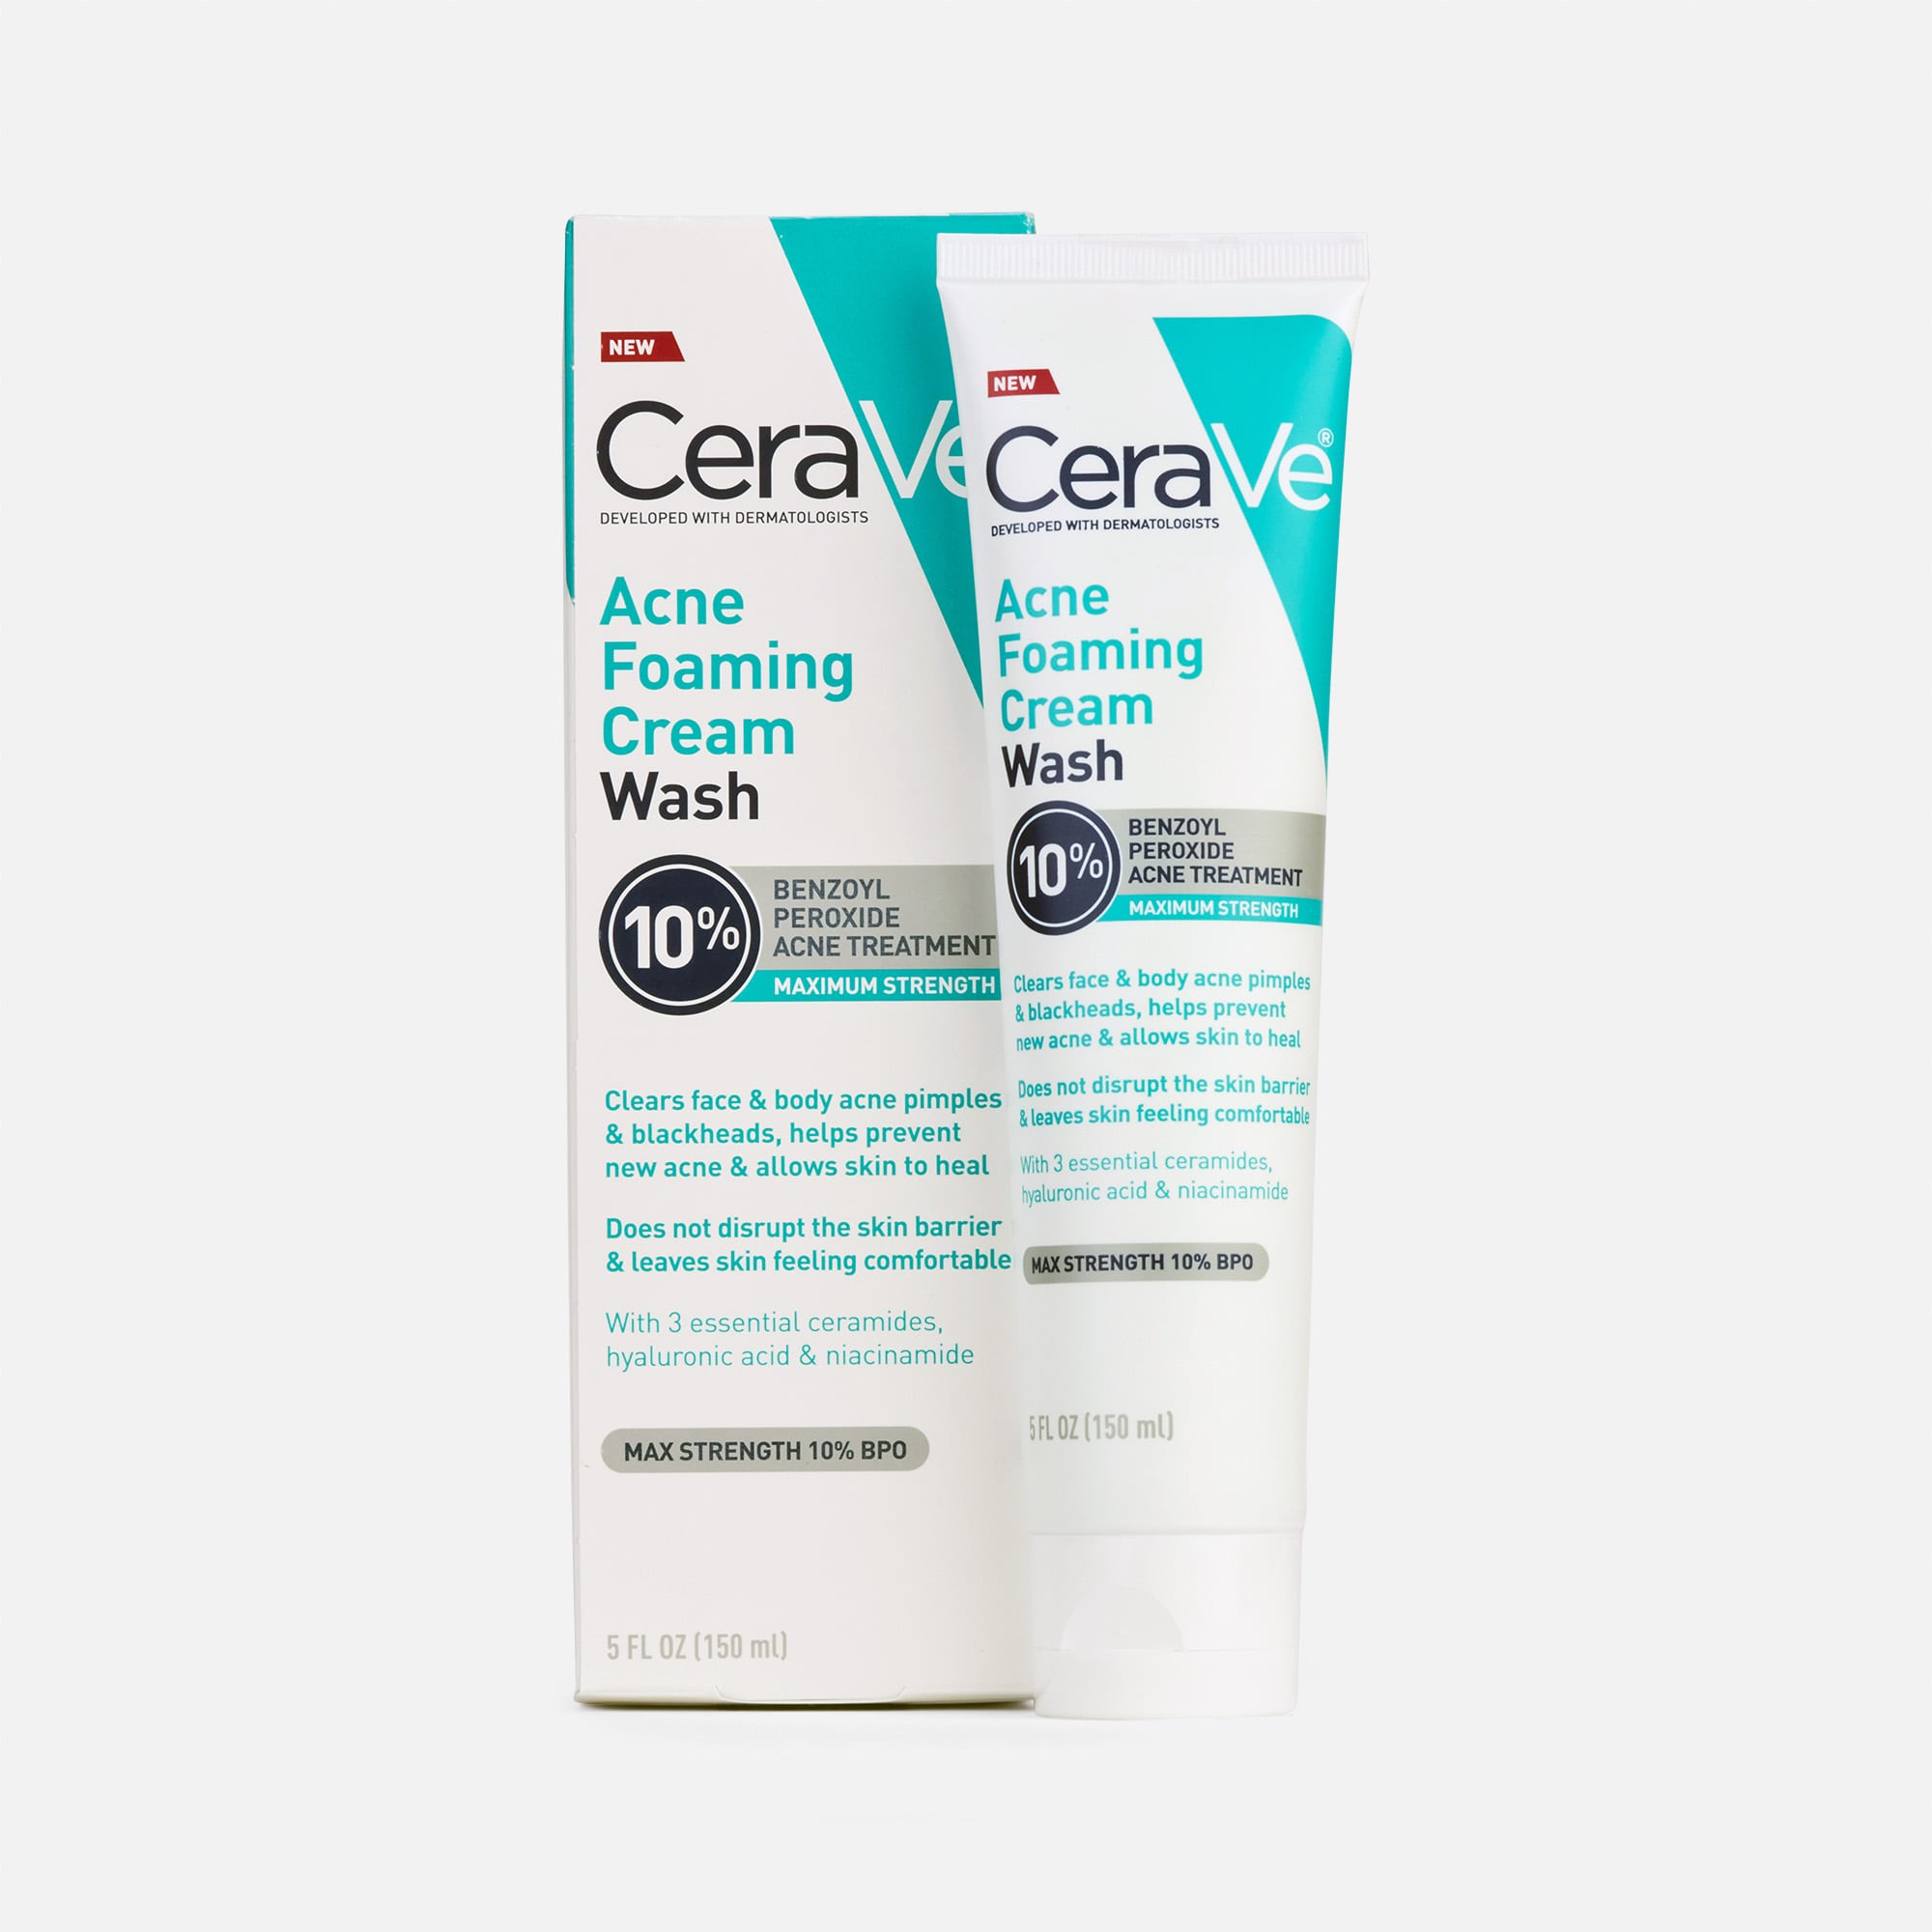 HSA Eligible  CeraVe Acne Foaming Cream Face & Body Wash with Benzoyl  Peroxide 10% Maximum Strength, 5 fl oz.